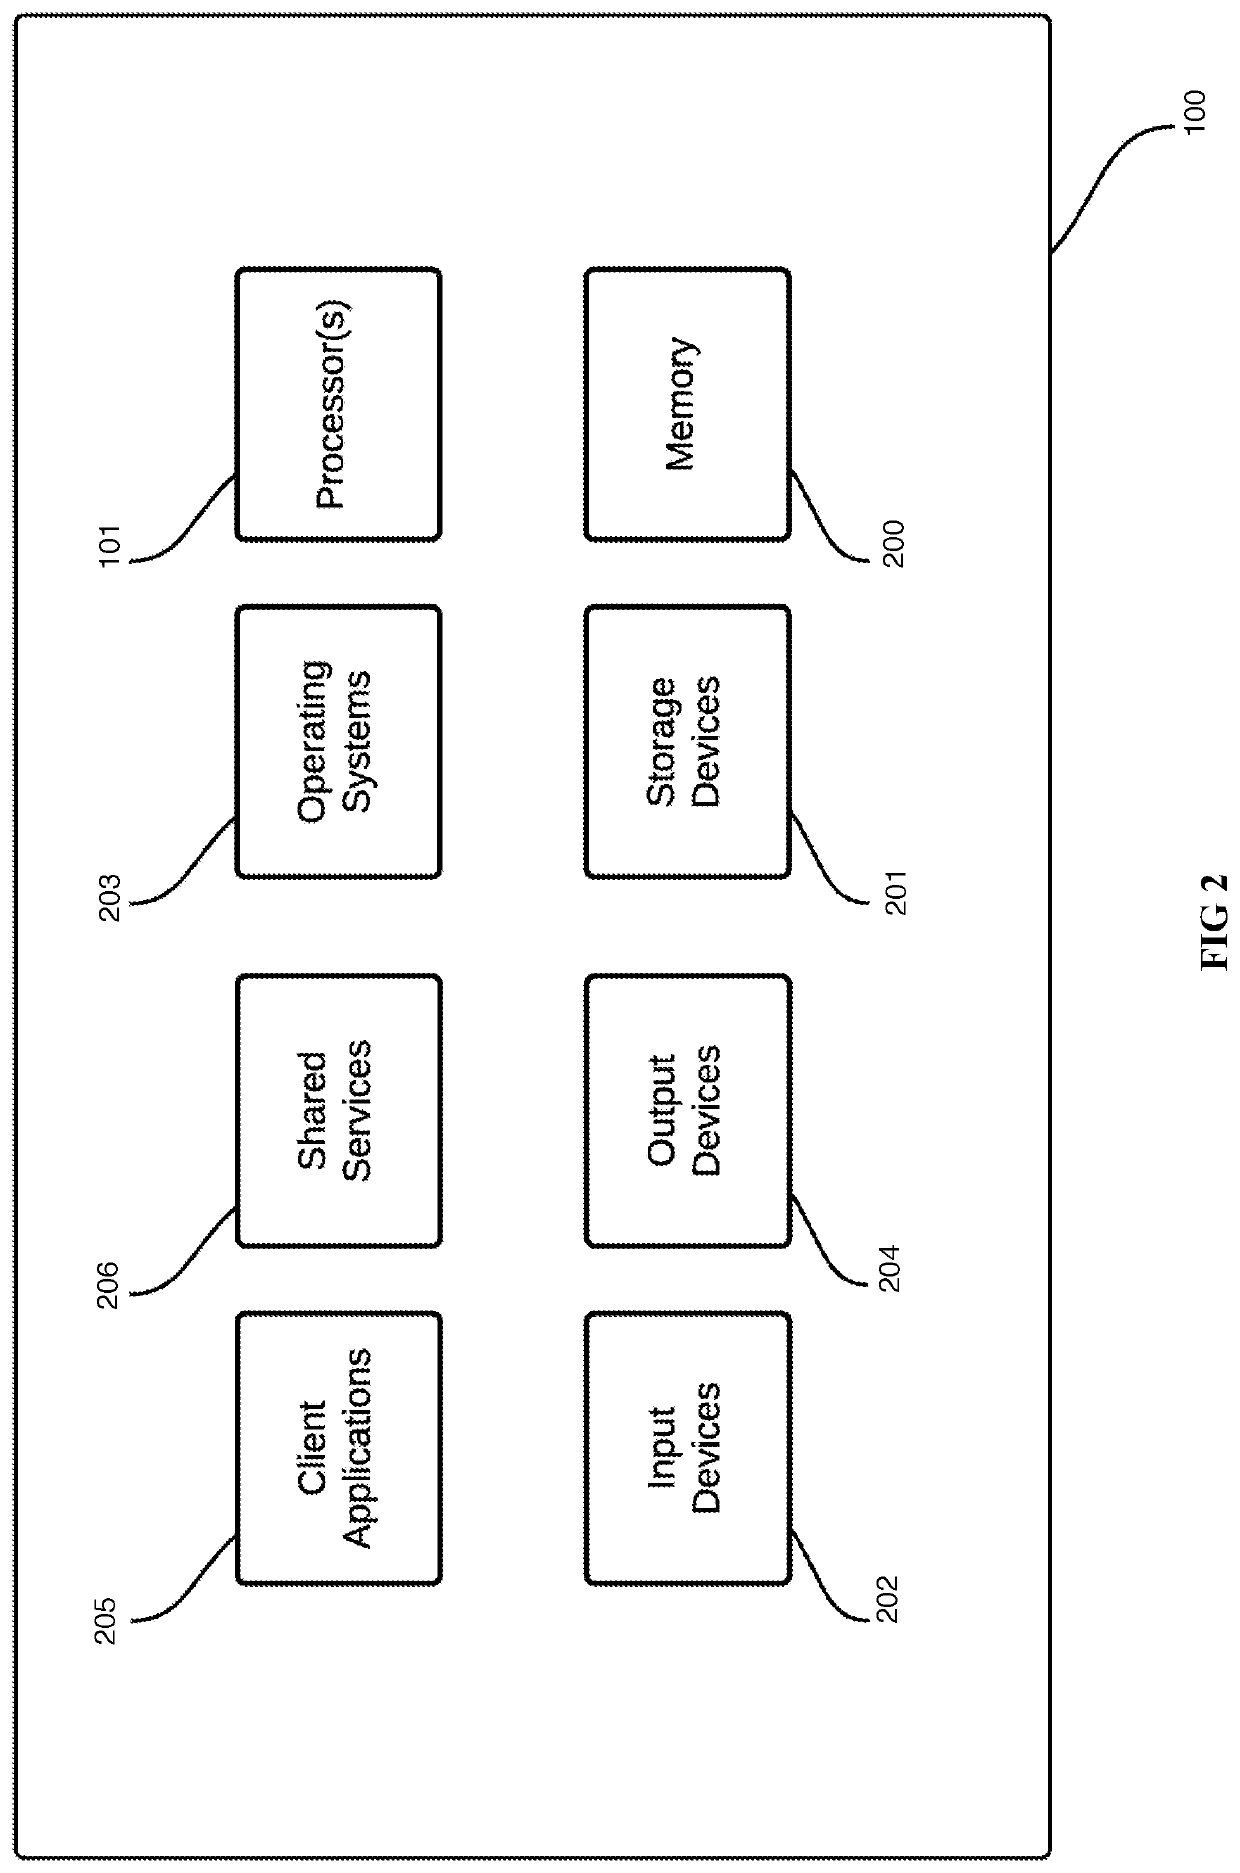 System and method for heuristic predictive and nonpredictive modeling